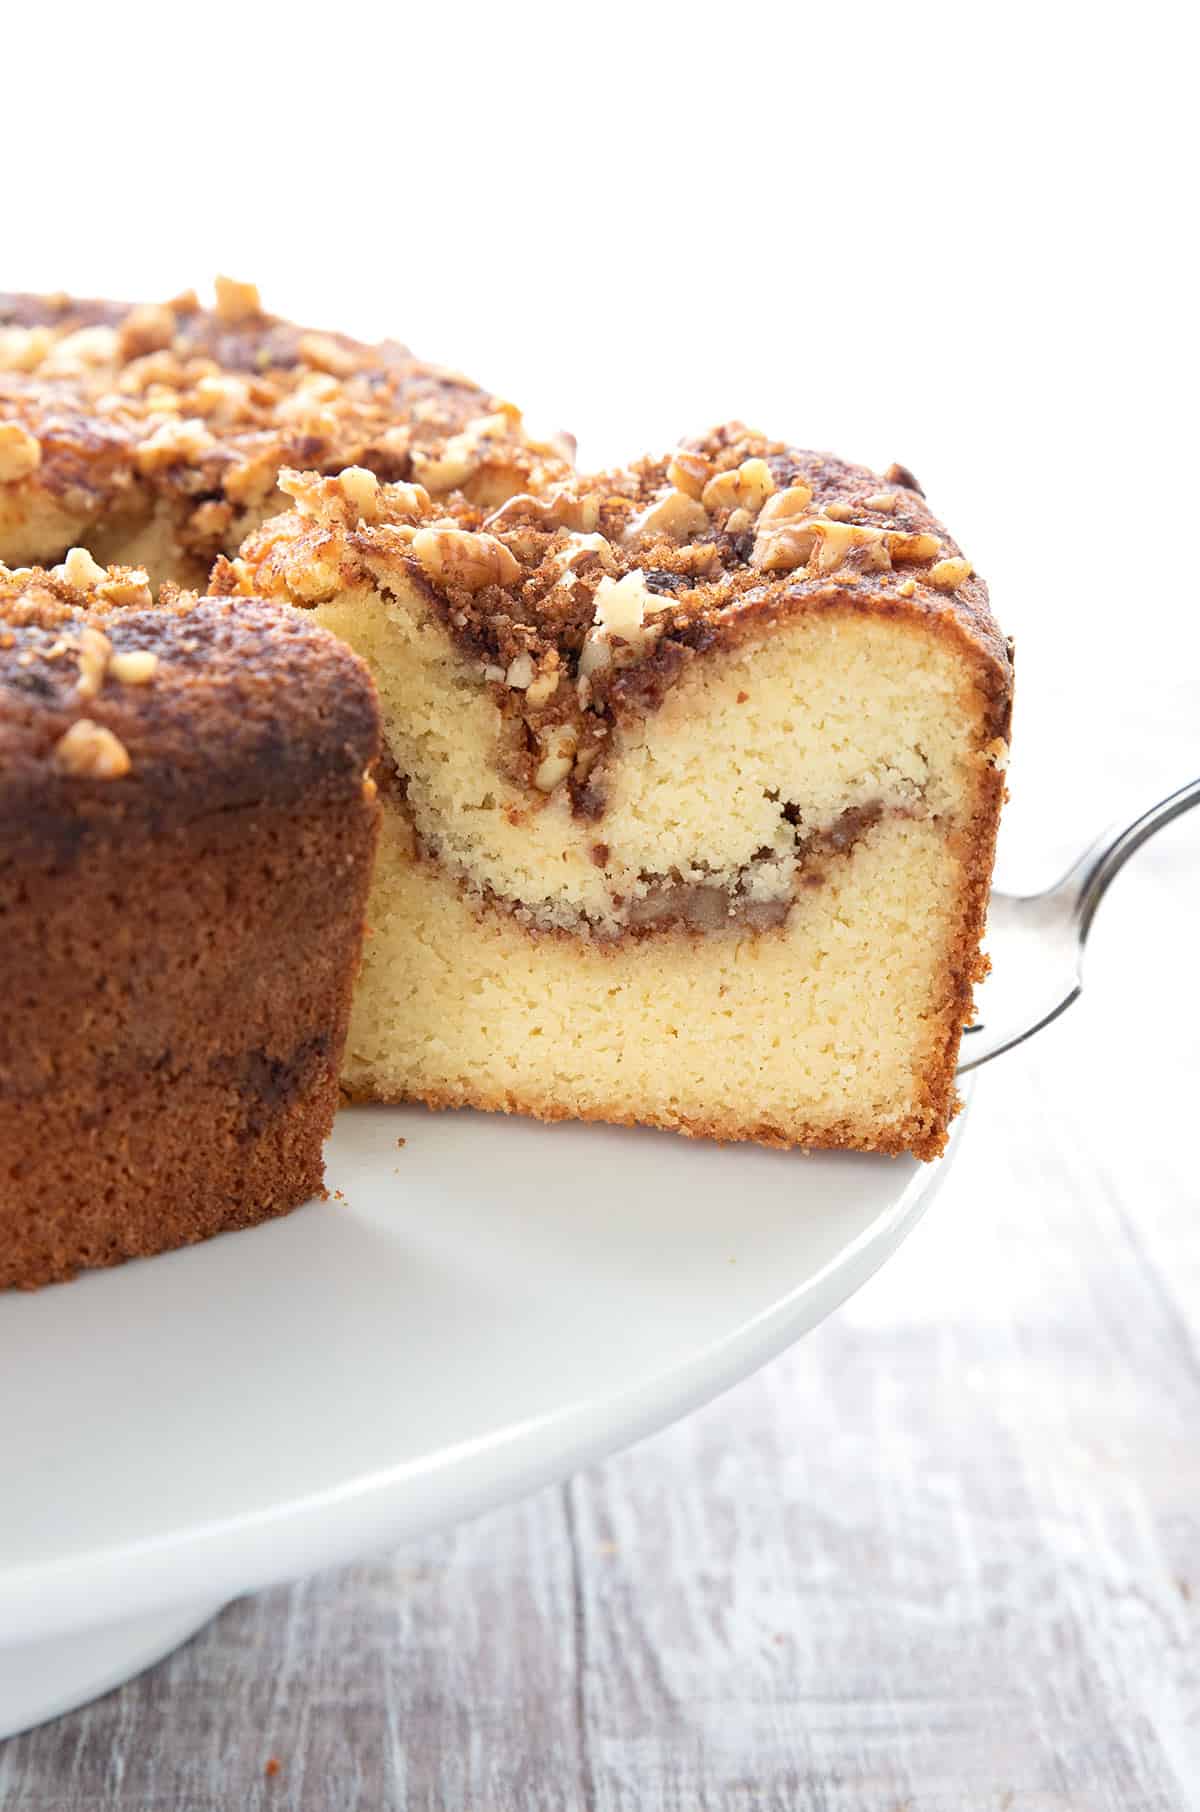 A slice of keto coffee cake being pulled away from the rest of the cake on a cake server.